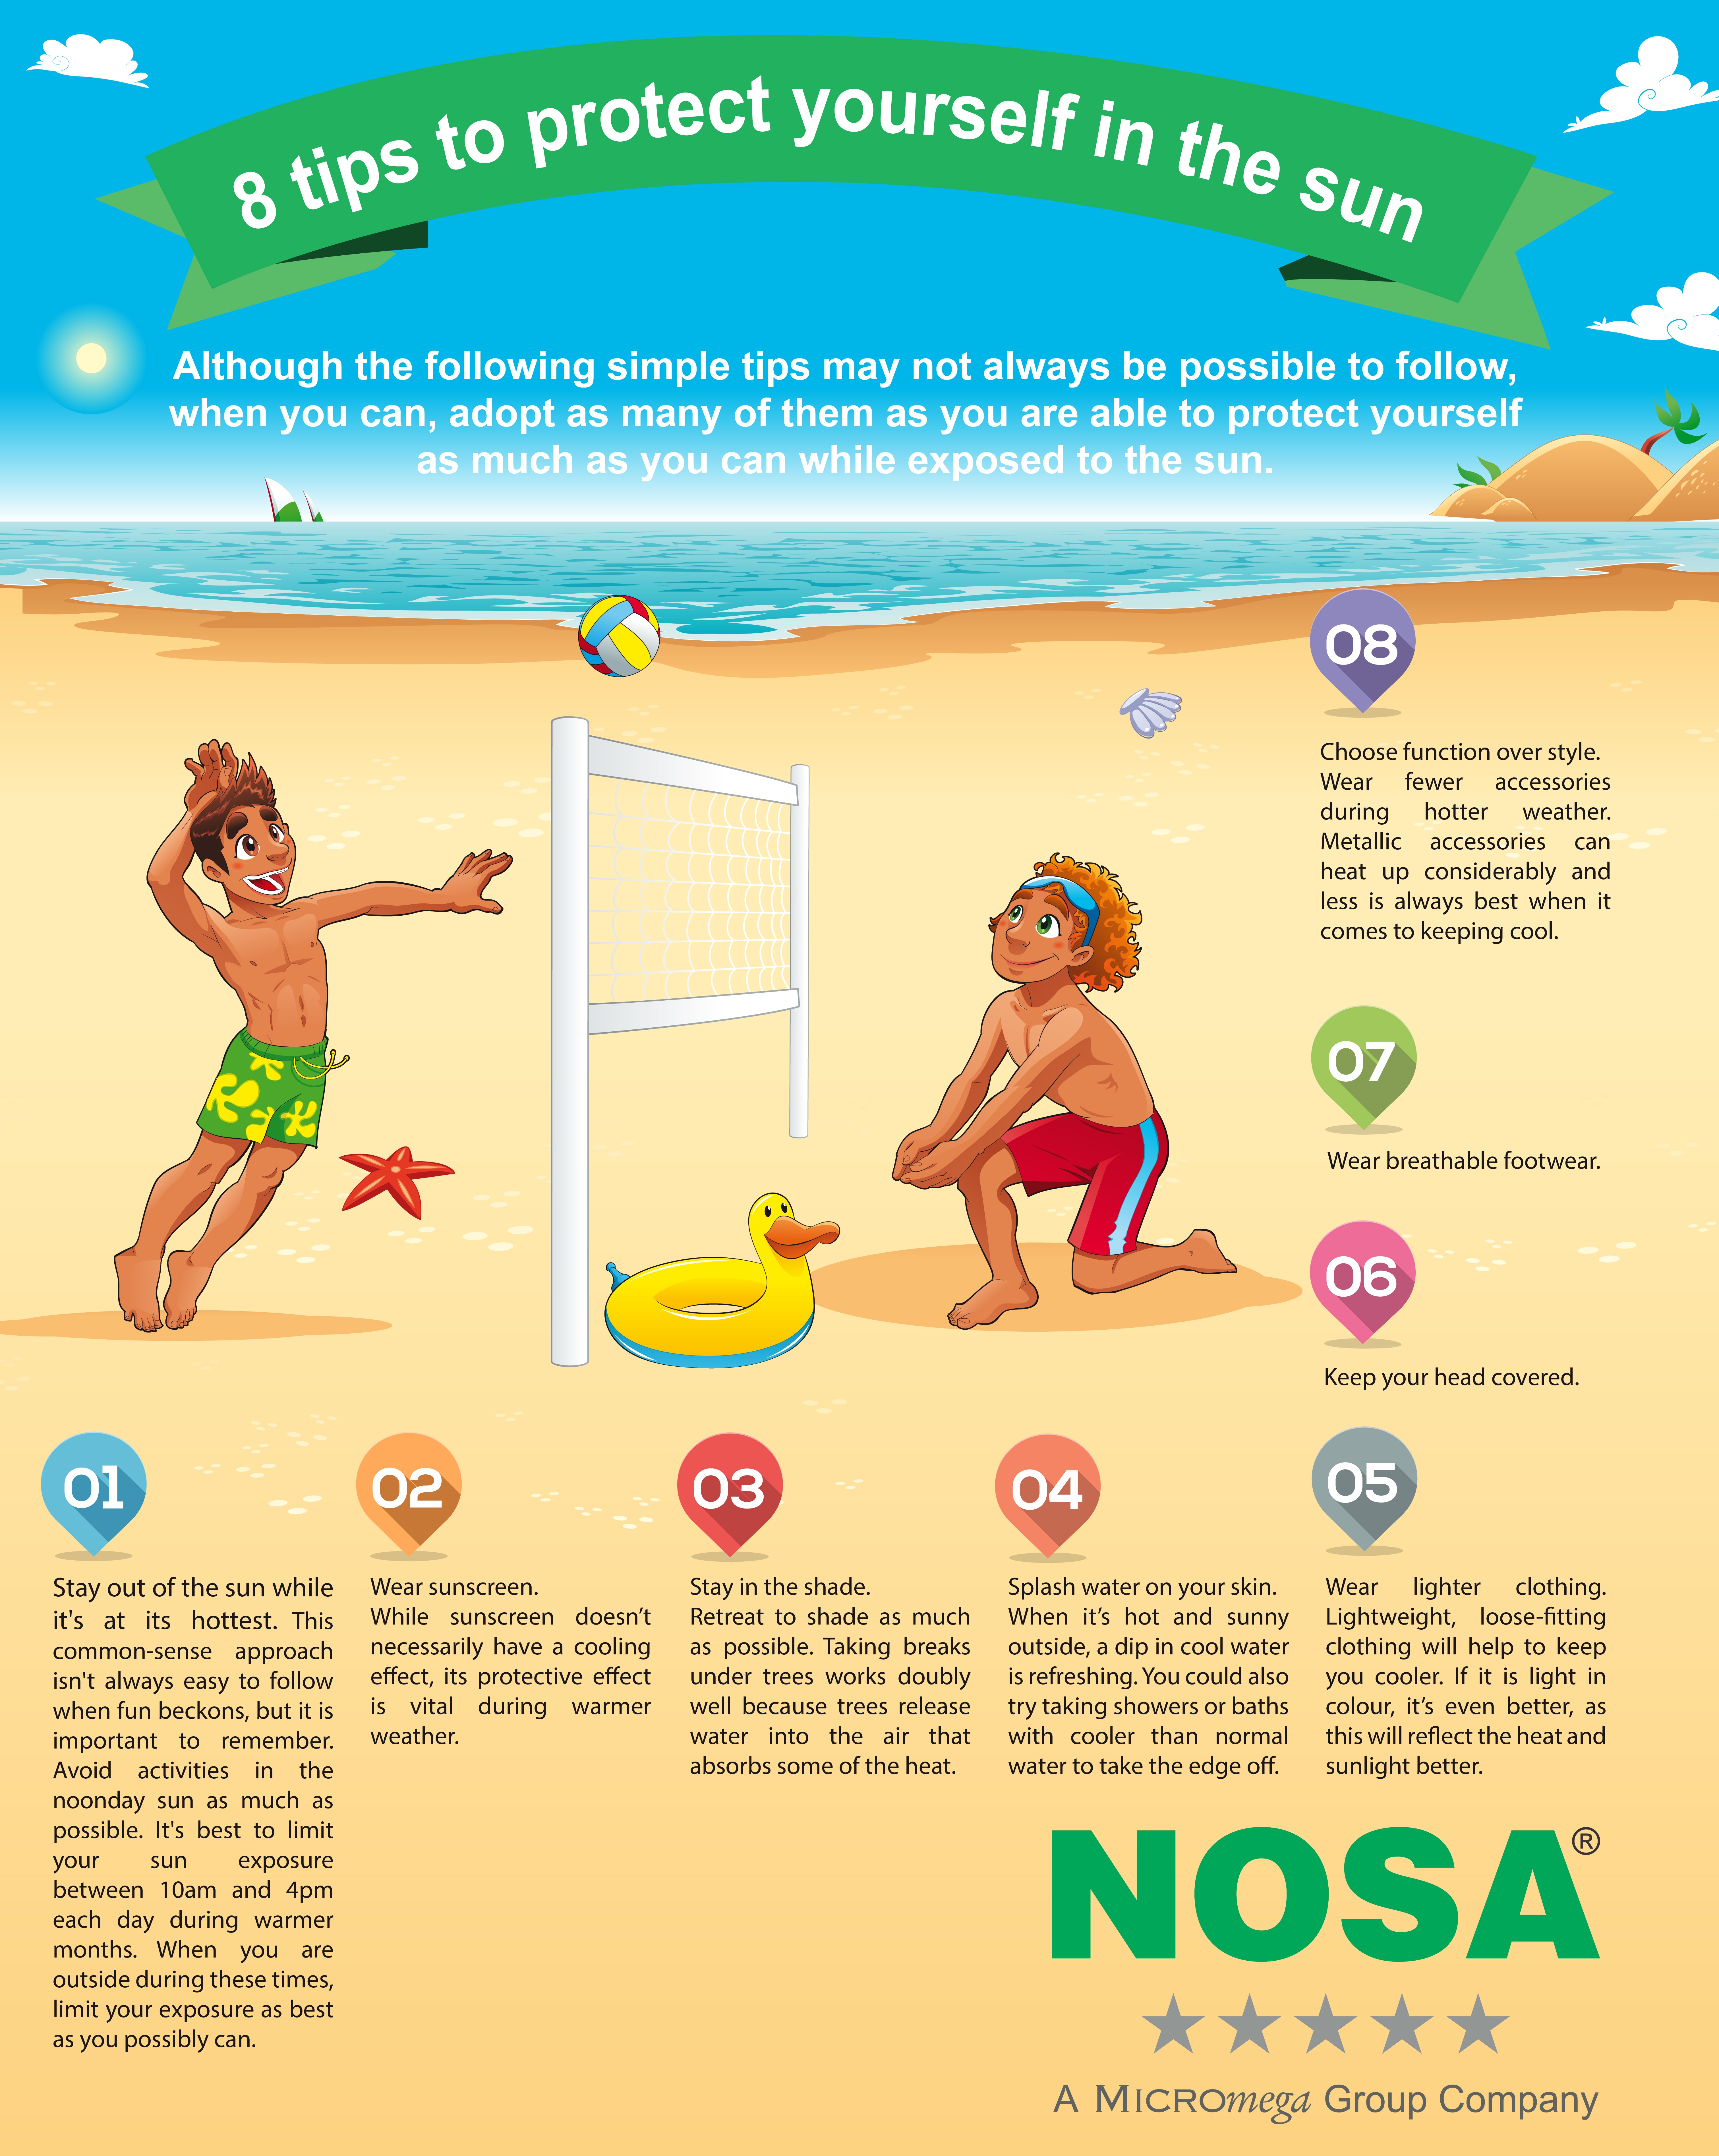 NOSA-8 tips to protect yourself in the sun-01.jpg